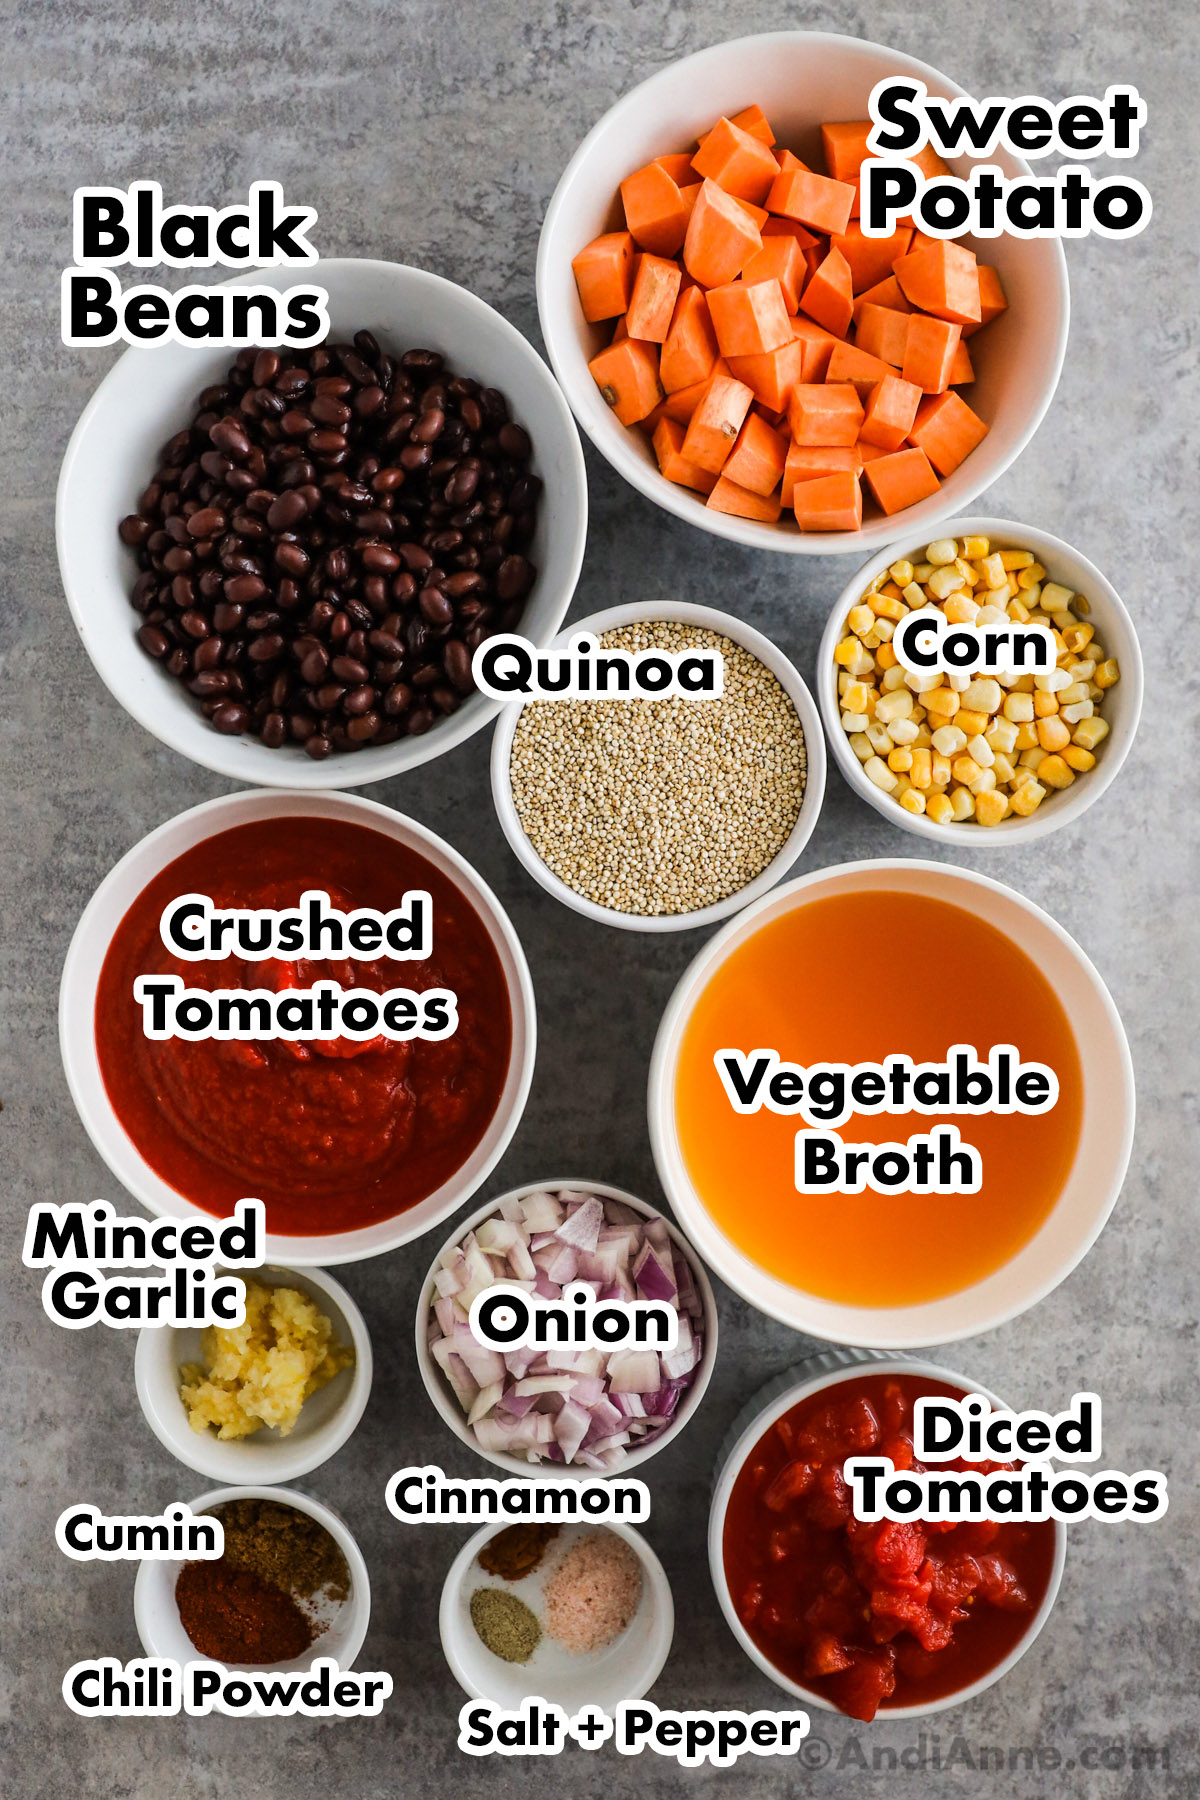 Recipe ingredients on the counter including bowls of chopped sweet potato, black beans, raw quinoa, corn, crushed tomatoes, vegetable broth, minced garlic, chopped onion, diced tomatoes, and spices.